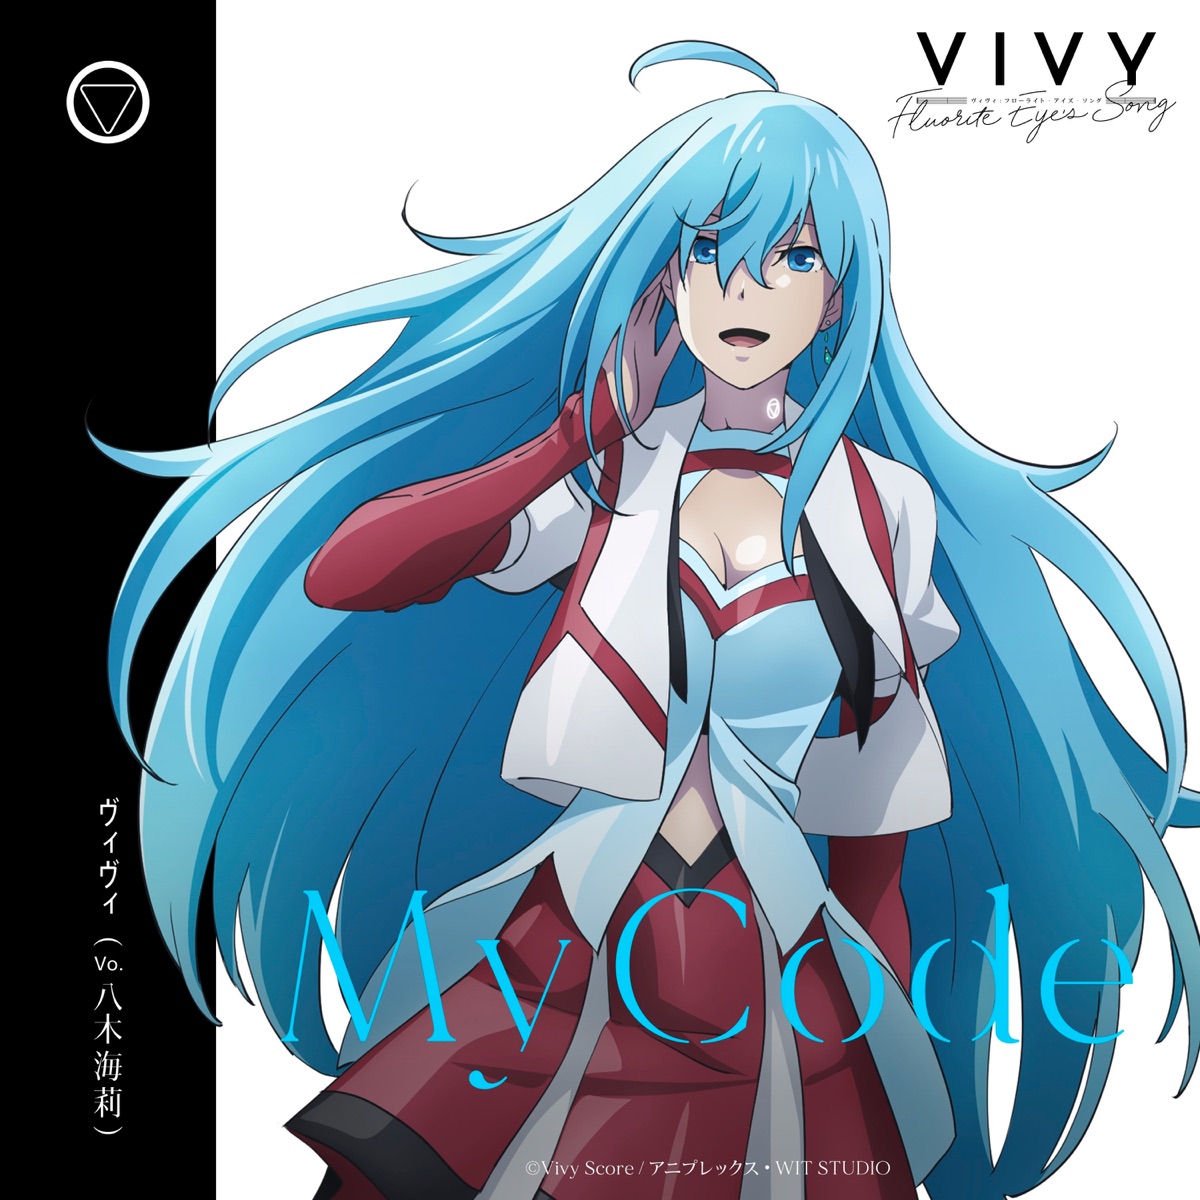 Cover art for『Vivy (Kairi Yagi) - My Code』from the release『My Code』